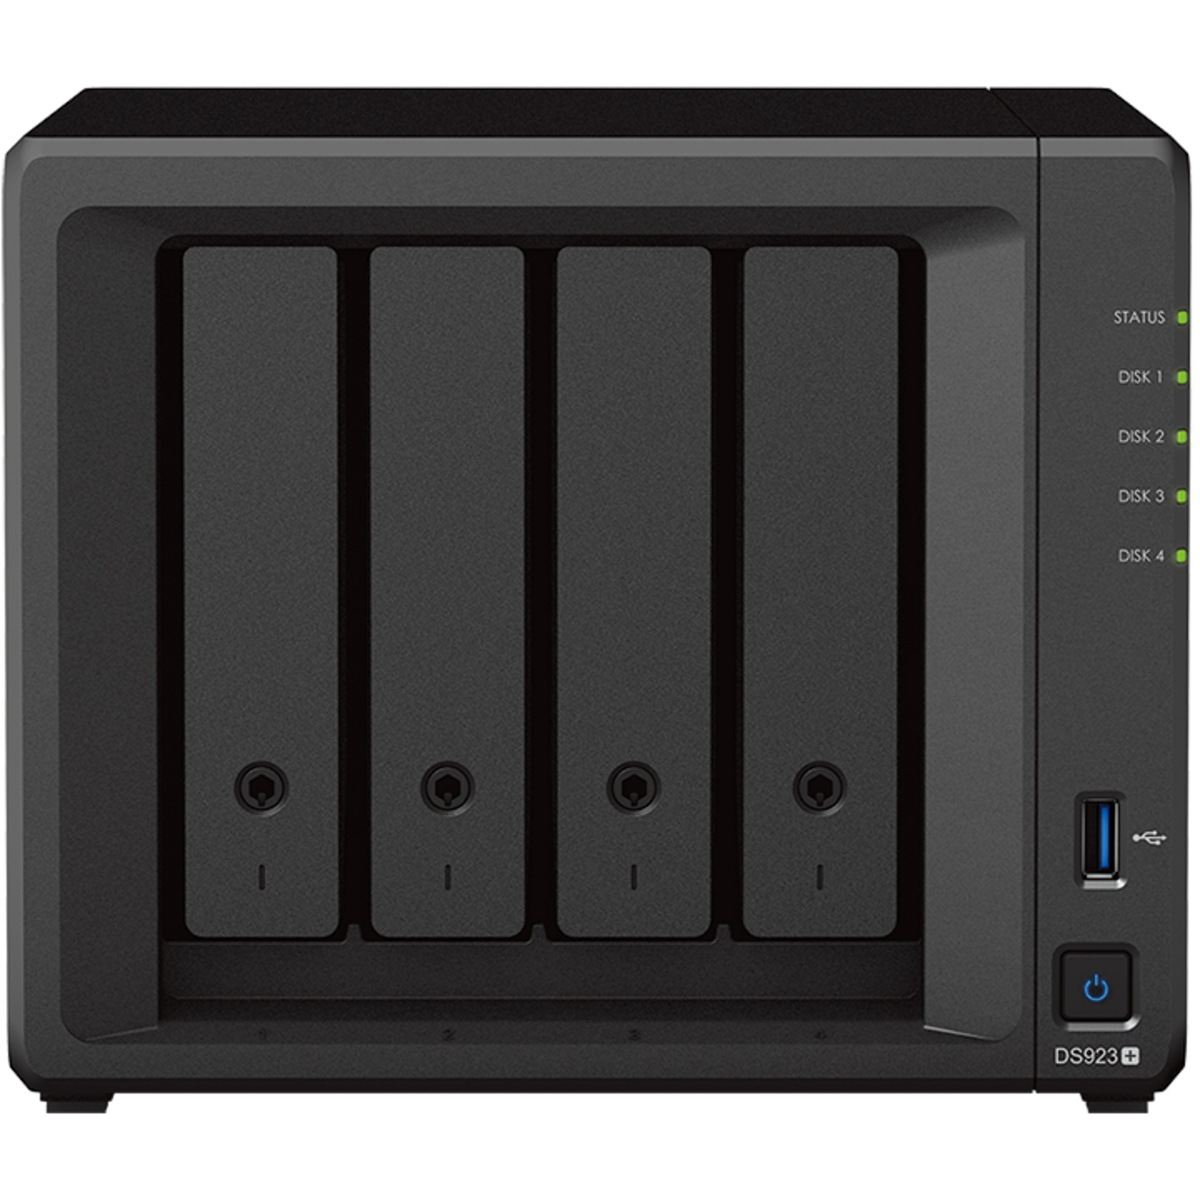 Synology DiskStation DS923+ 64tb 4-Bay Desktop Multimedia / Power User / Business NAS - Network Attached Storage Device 4x16tb Seagate EXOS X18 ST16000NM000J 3.5 7200rpm SATA 6Gb/s HDD ENTERPRISE Class Drives Installed - Burn-In Tested - ON SALE - FREE RAM UPGRADE DiskStation DS923+